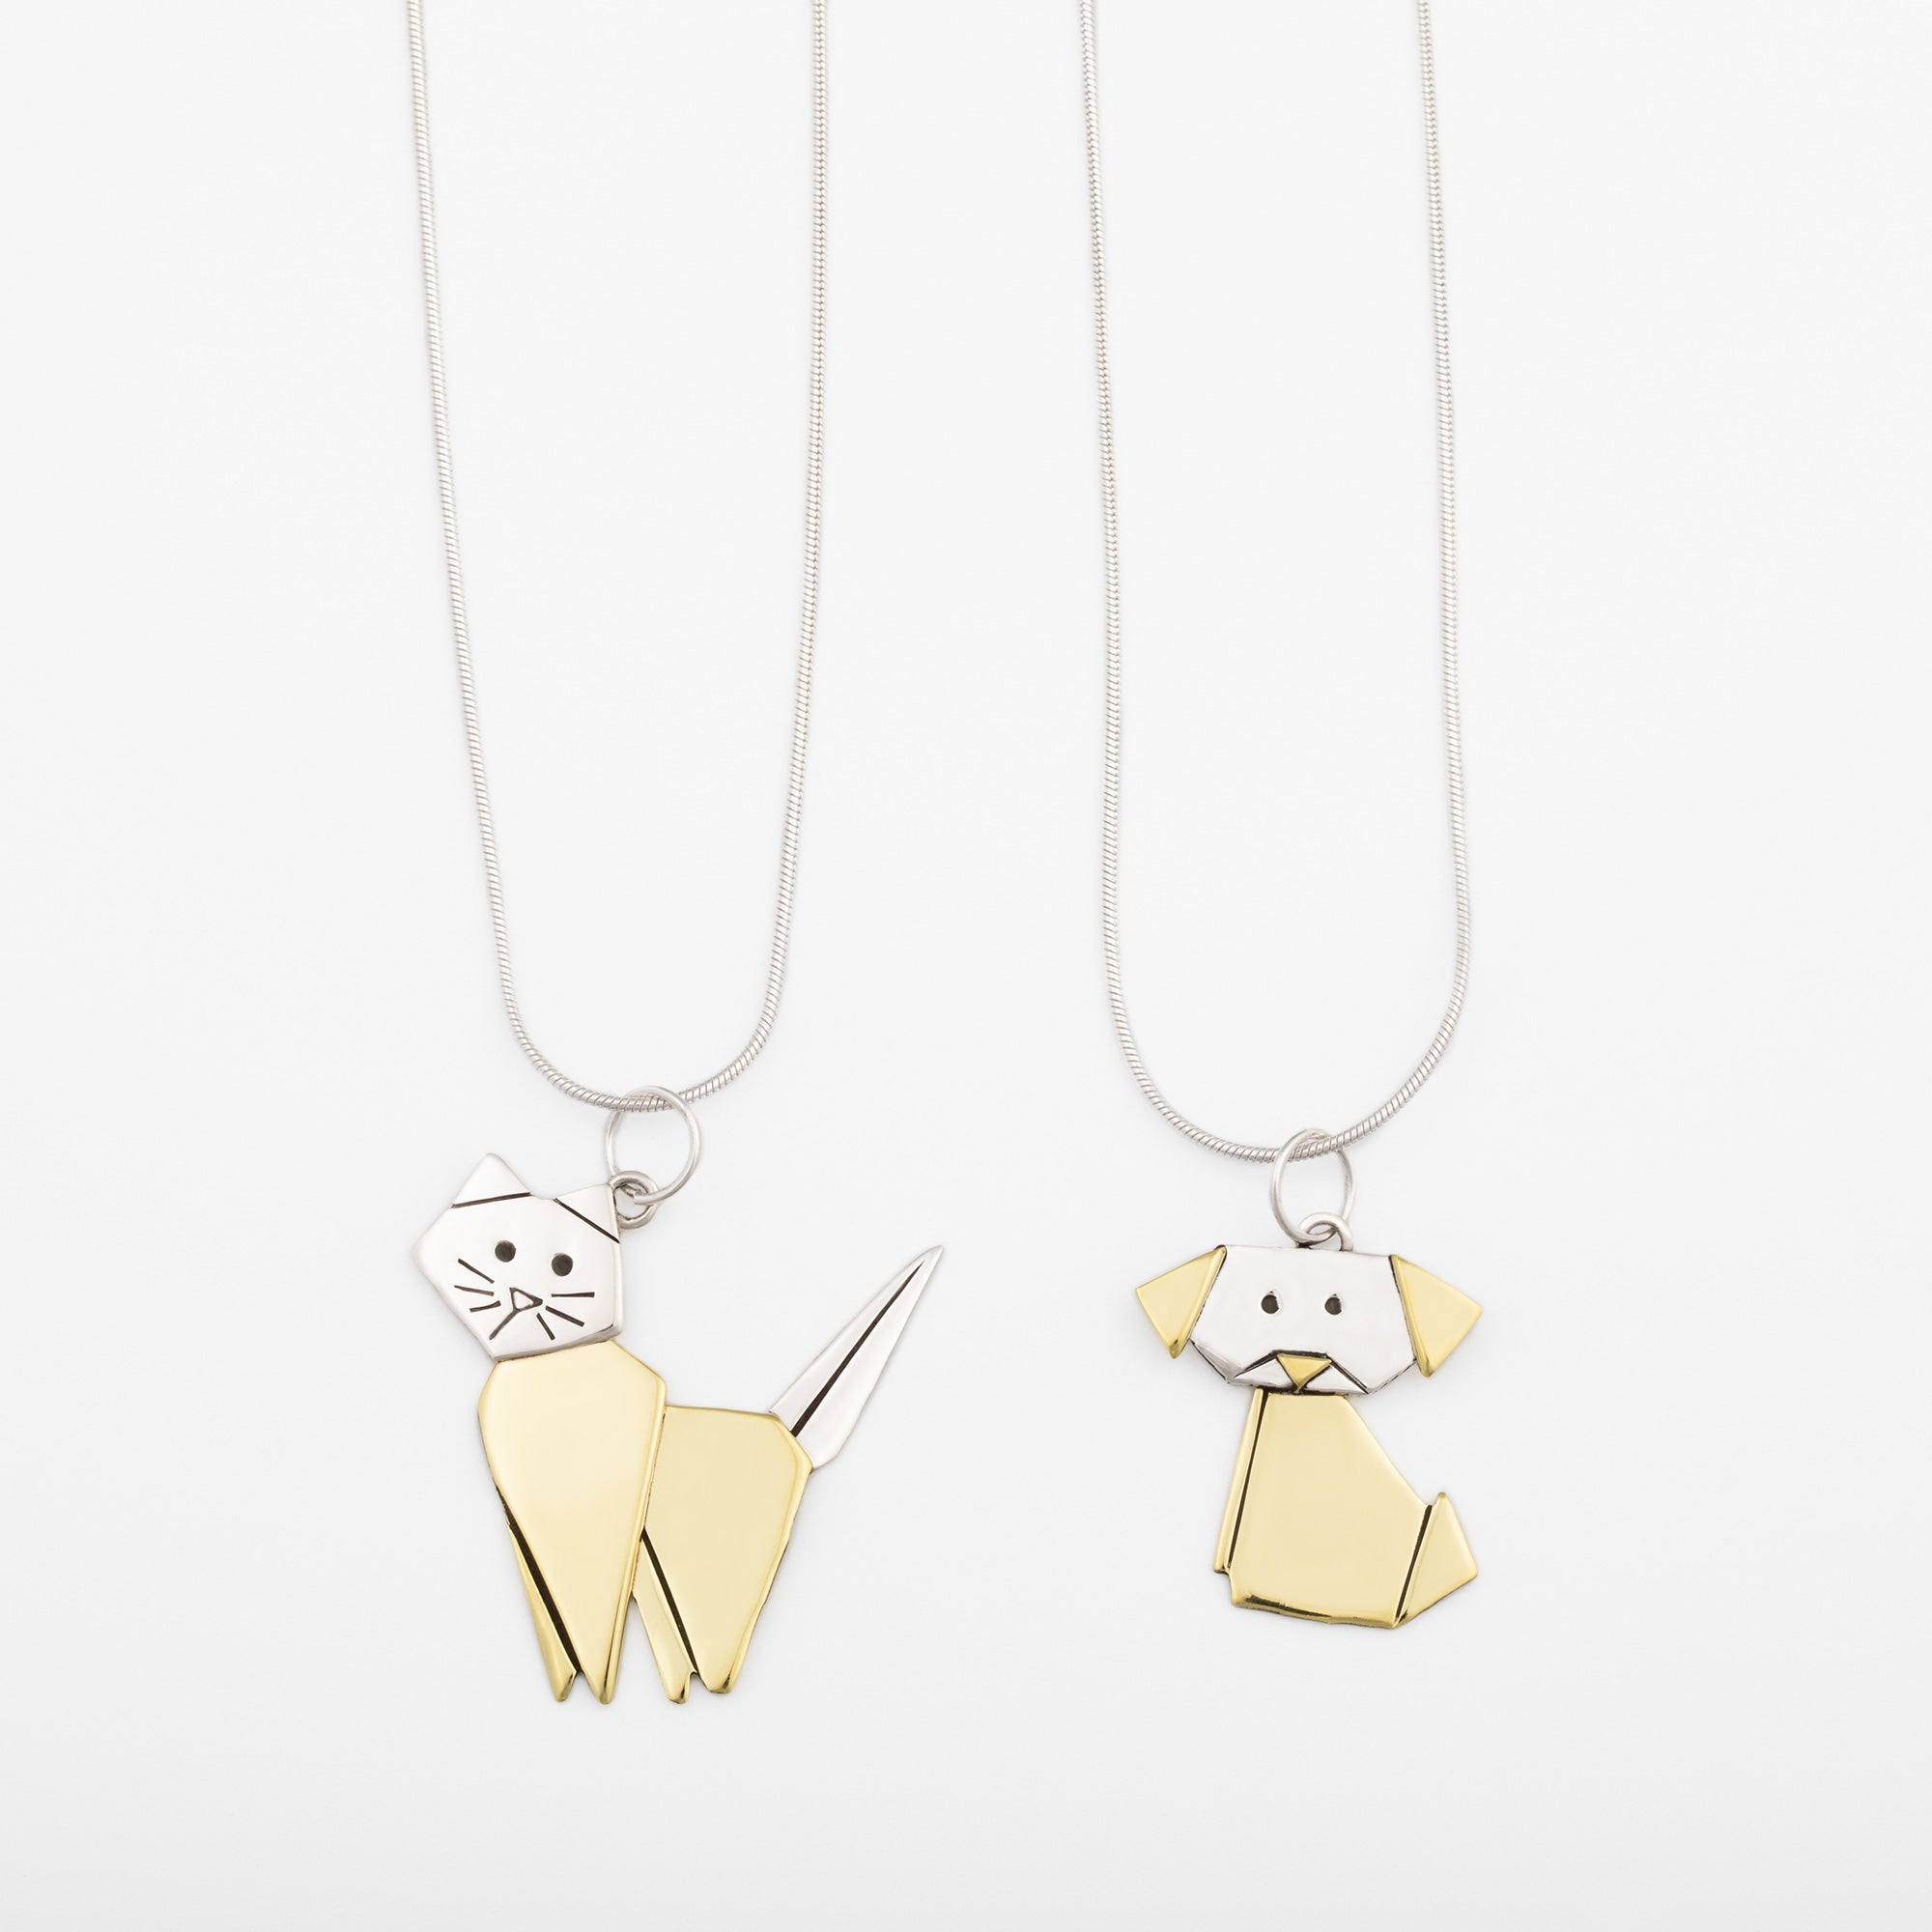 Origami Pet Necklace - Dog - Pendant Only